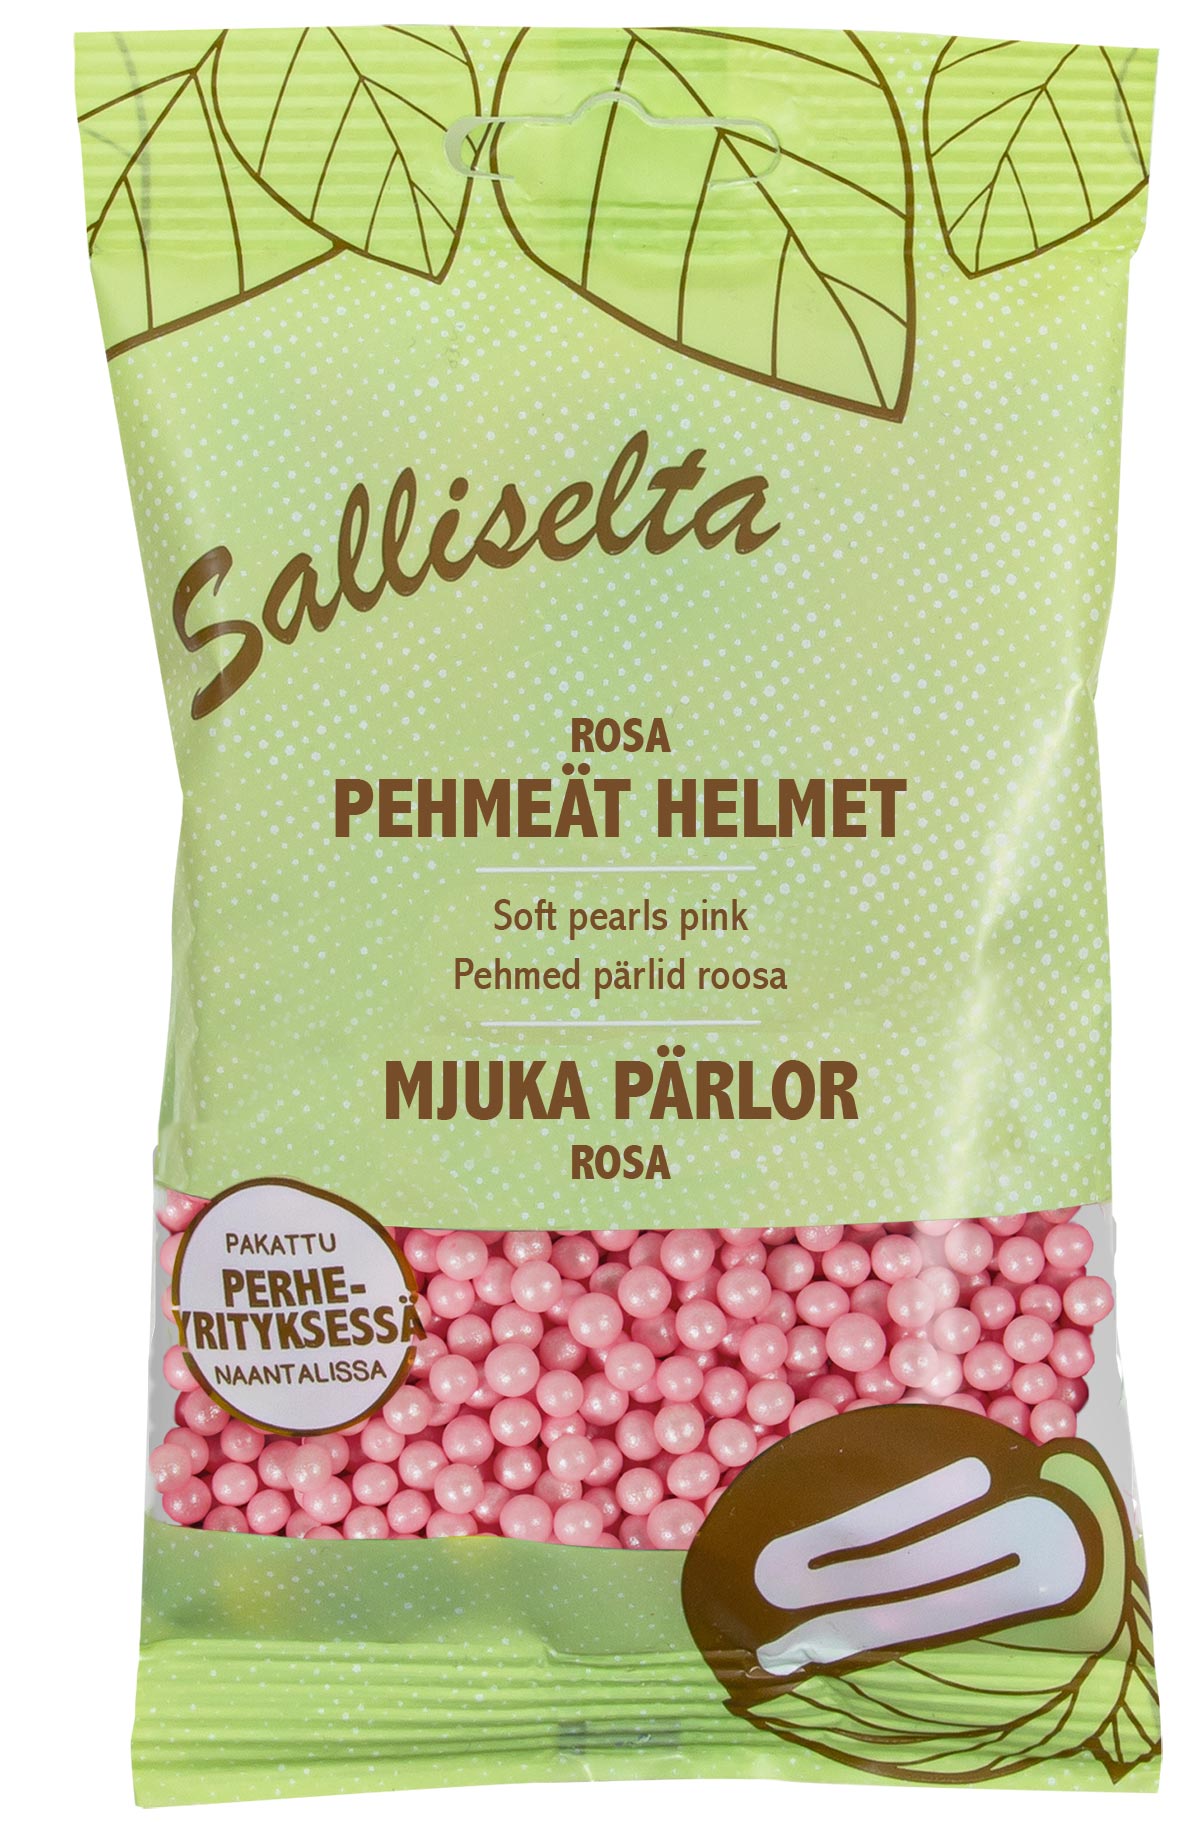 Soft pearls pink 80g